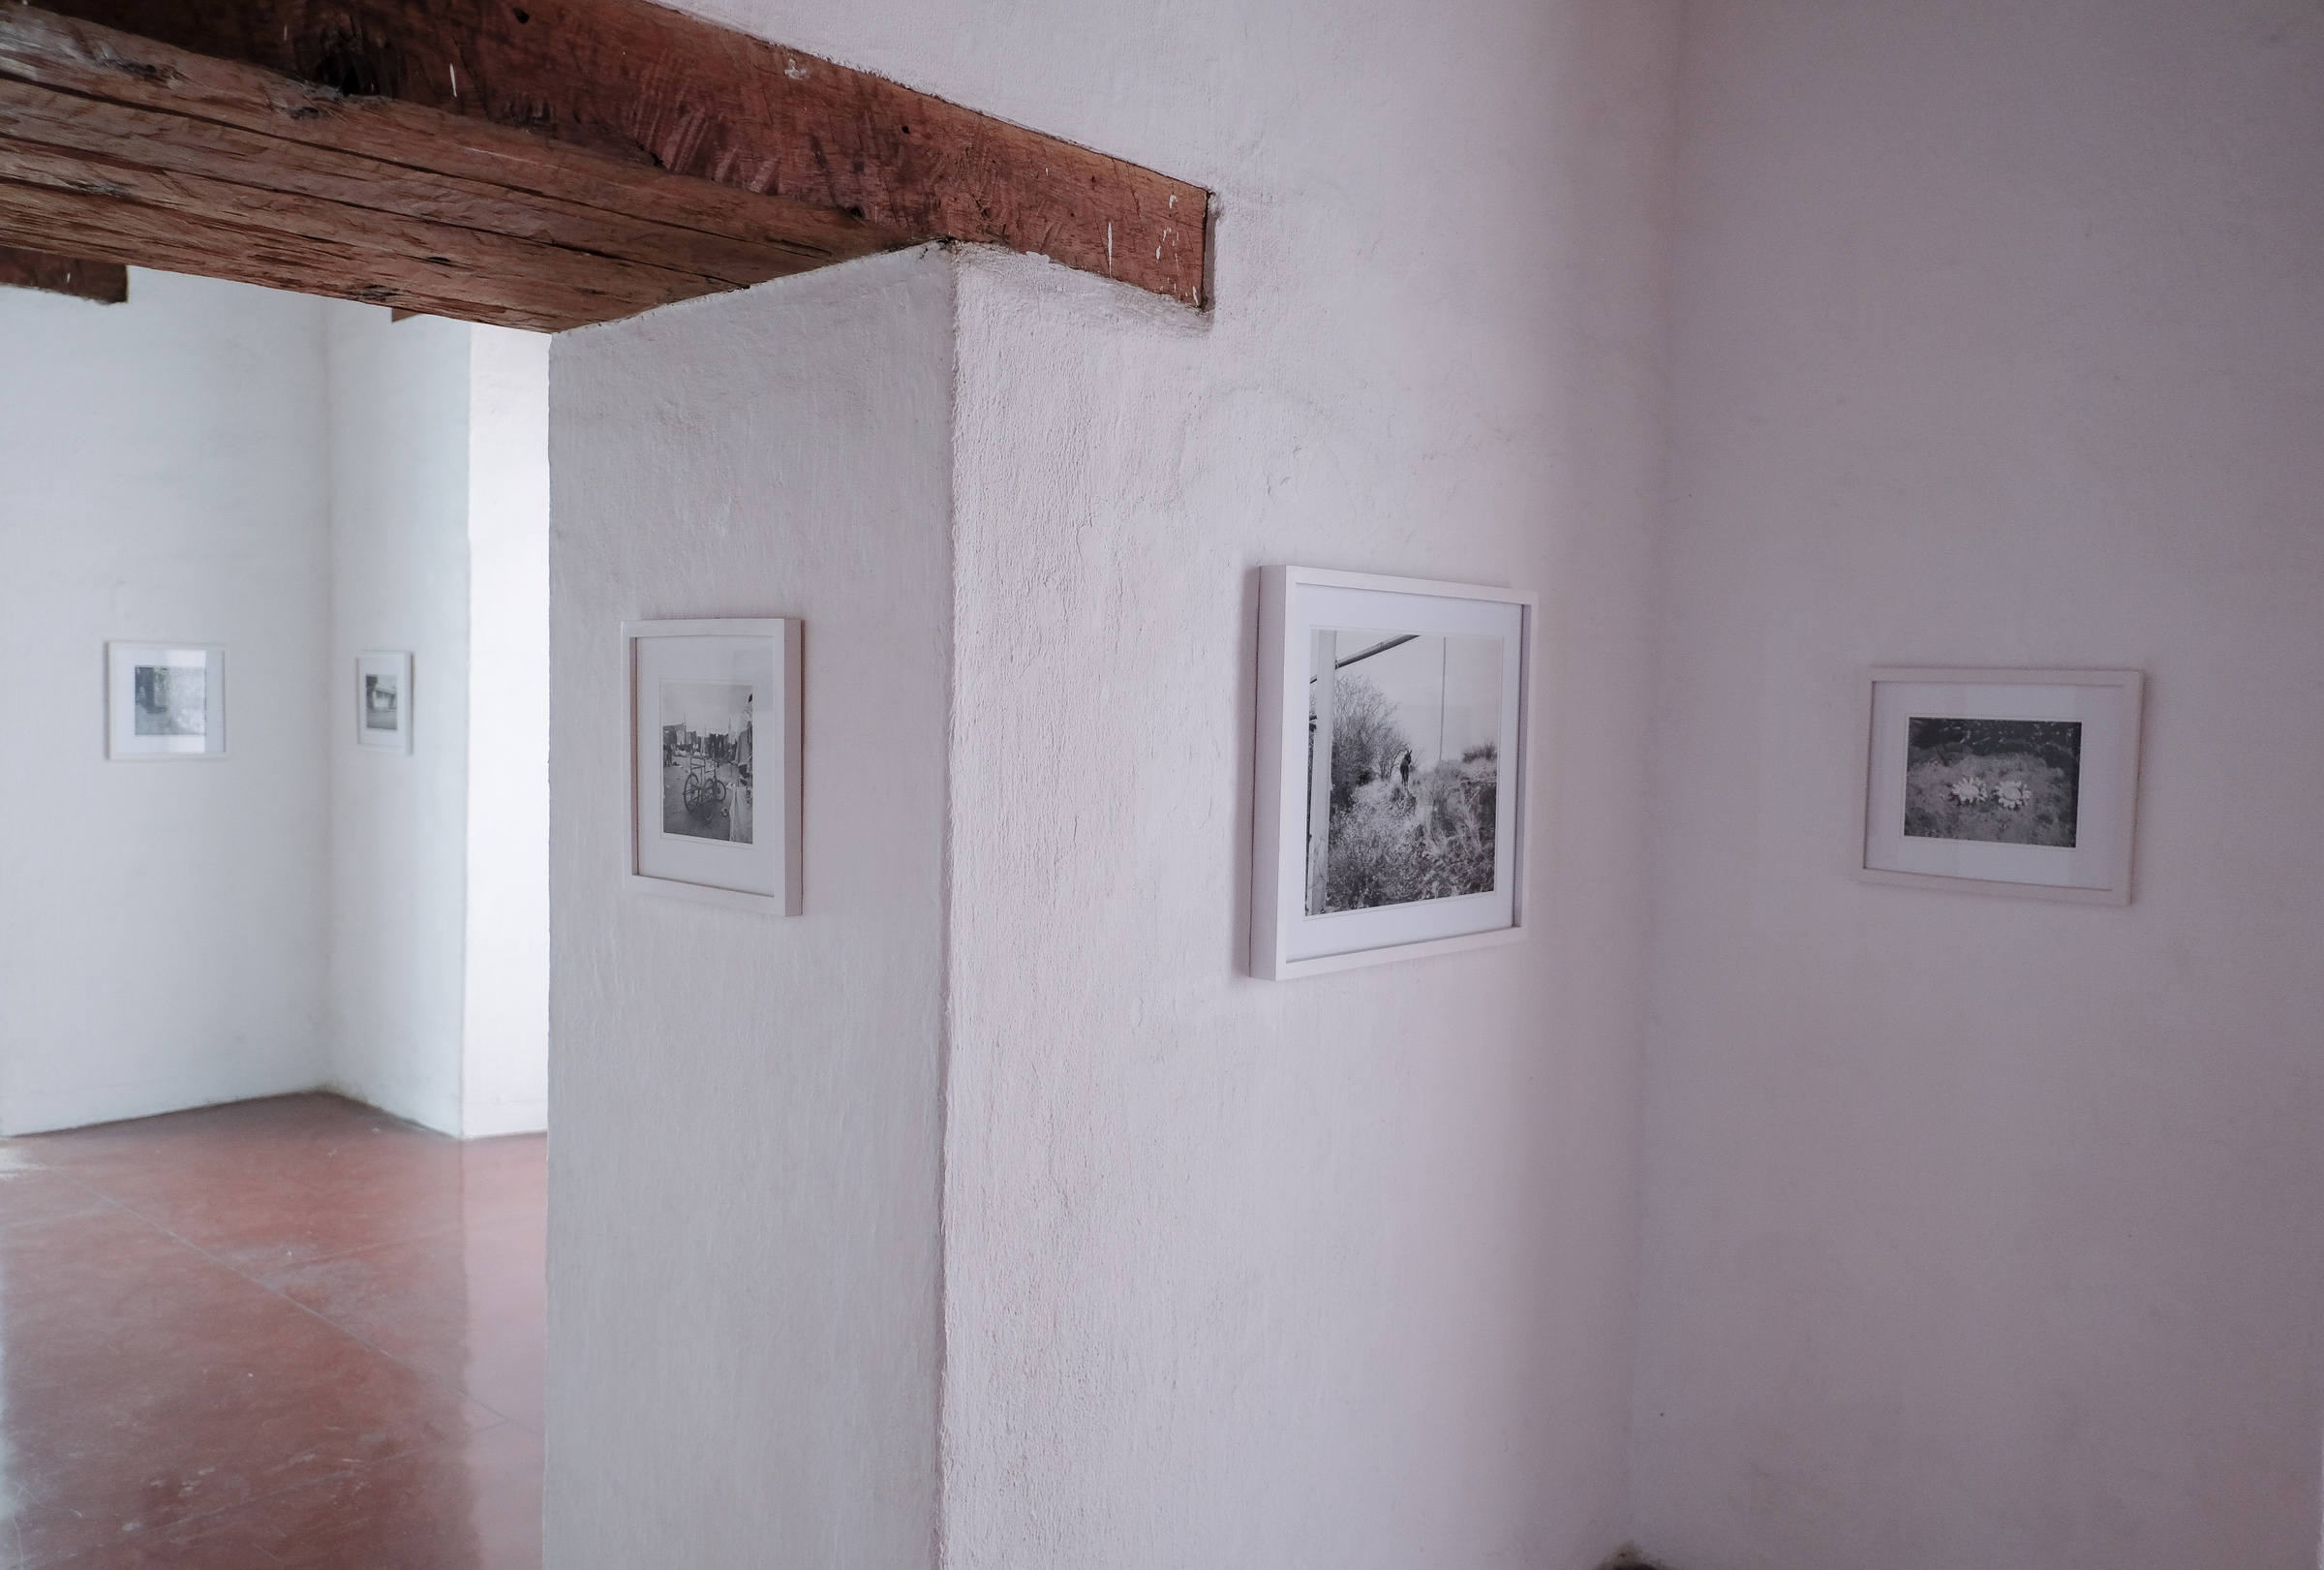 Installation photograph from the offsite exhibition ‘Hay Tiempo, No Hey Tiempo’ at the Centro Fotográfico Álvarez Bravo, Mexico. Jo Ratcliffe’s photographs ‘Wheelchair, Roque Santeiro market, Luanda’, ‘Donkey, Pomfret’ and ‘06: Ceres’ are hung on white washed walls at eye level around the gallery space.
